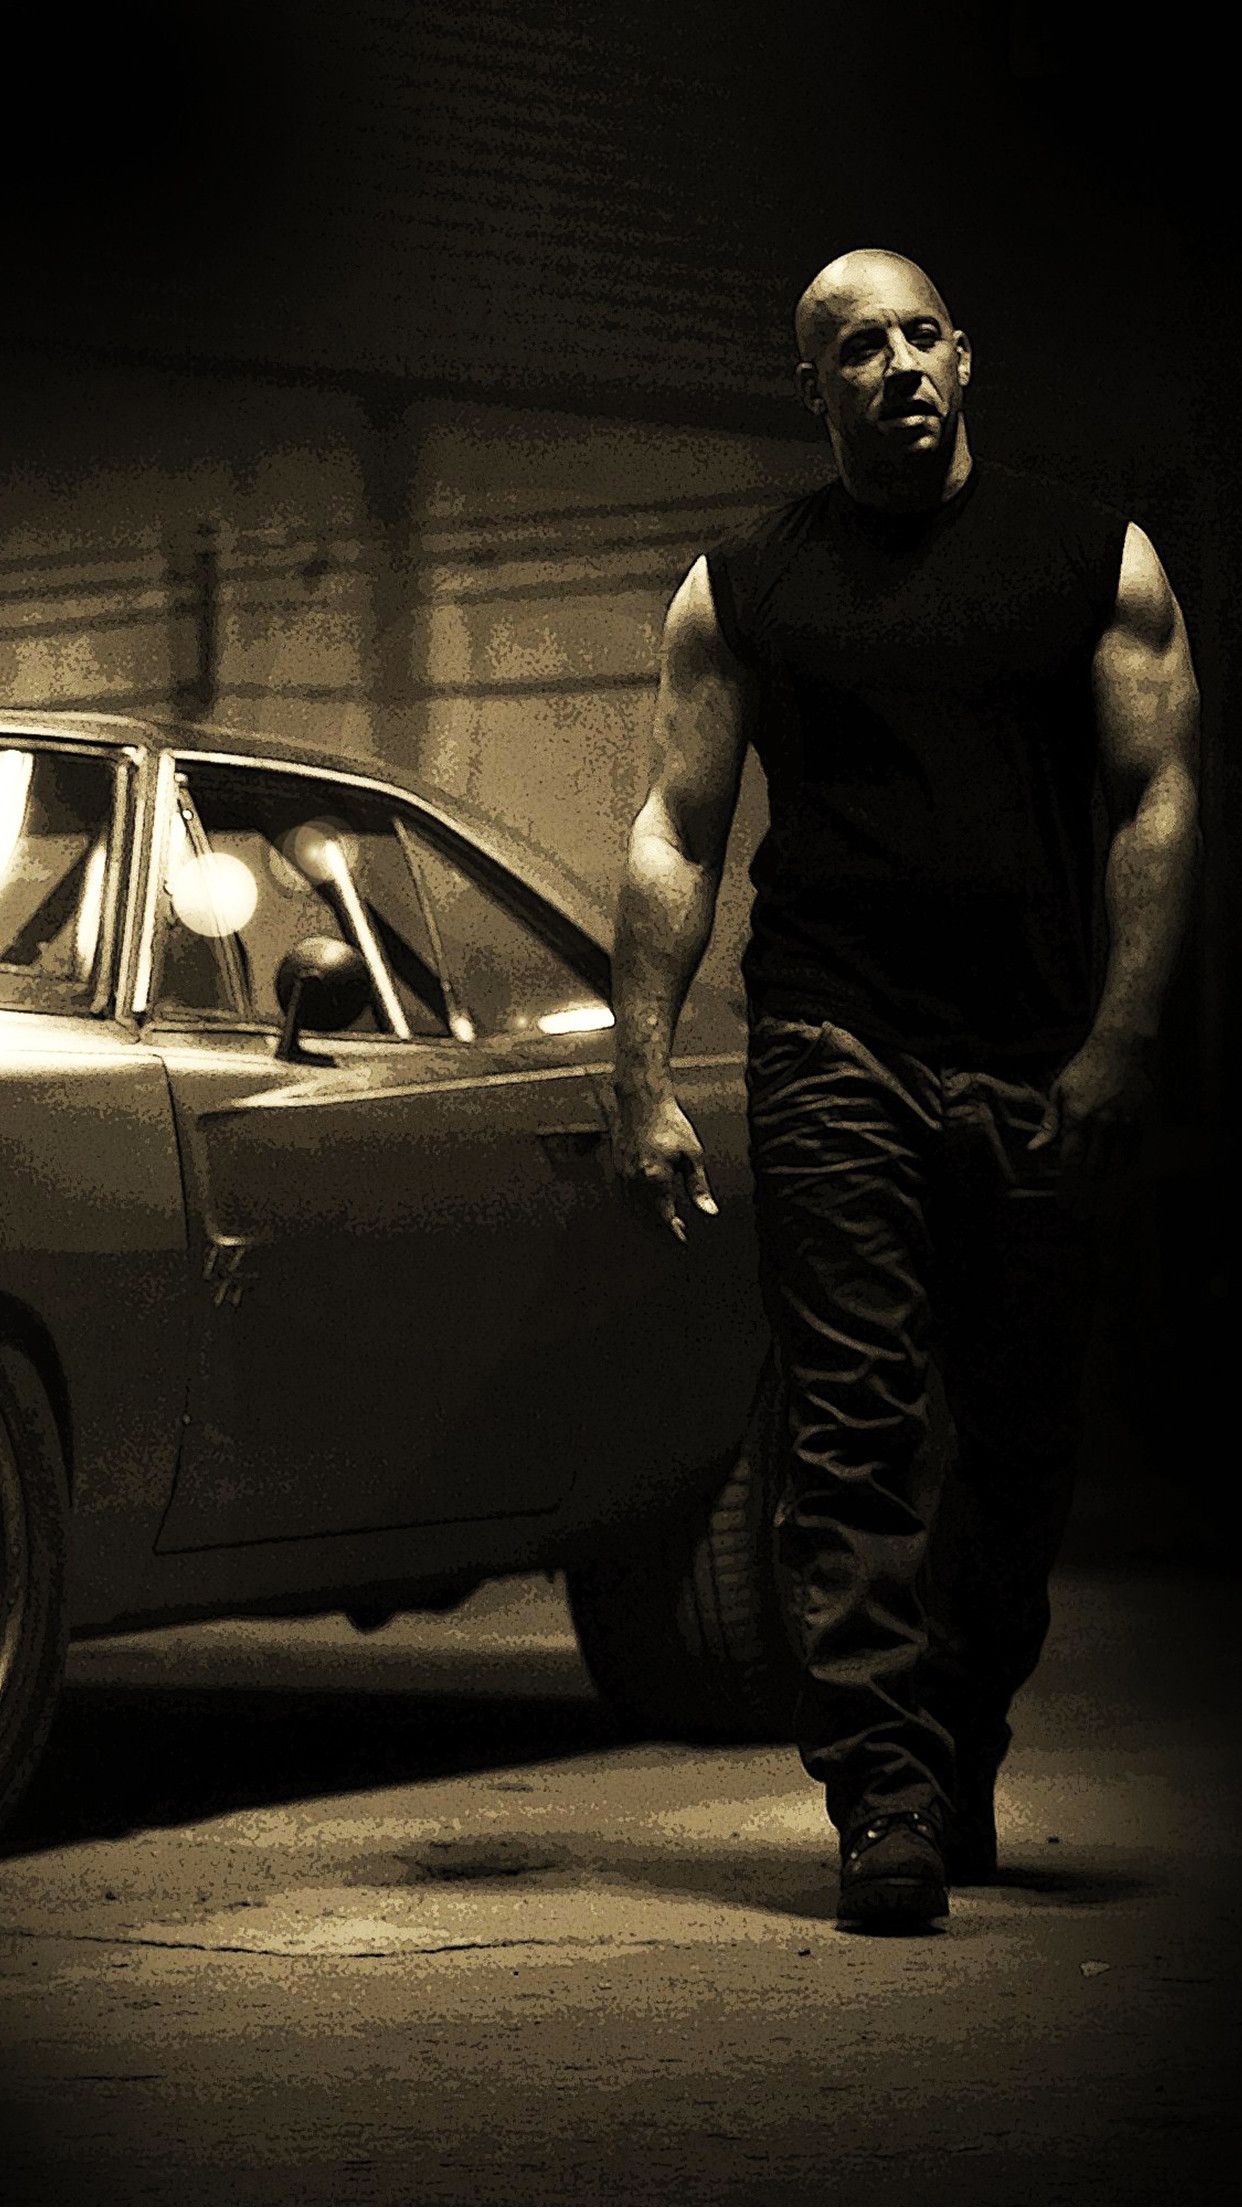 Vin Diesel Fast and Furious Wallpaper background picture